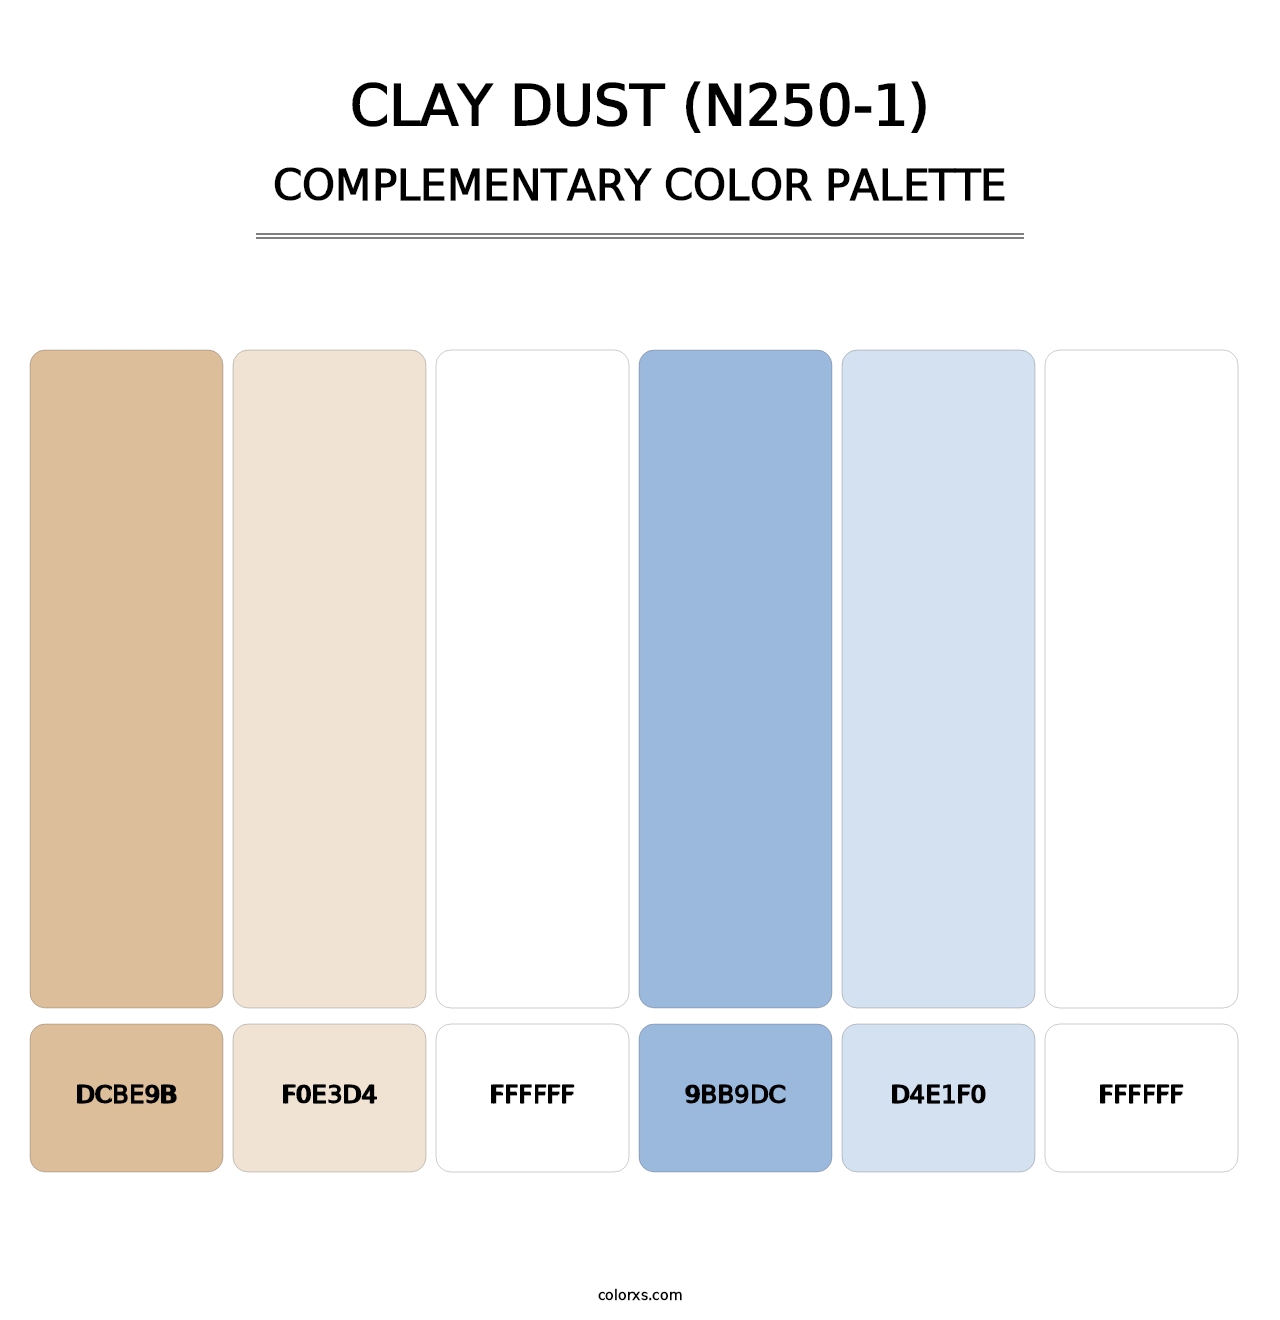 Clay Dust (N250-1) - Complementary Color Palette